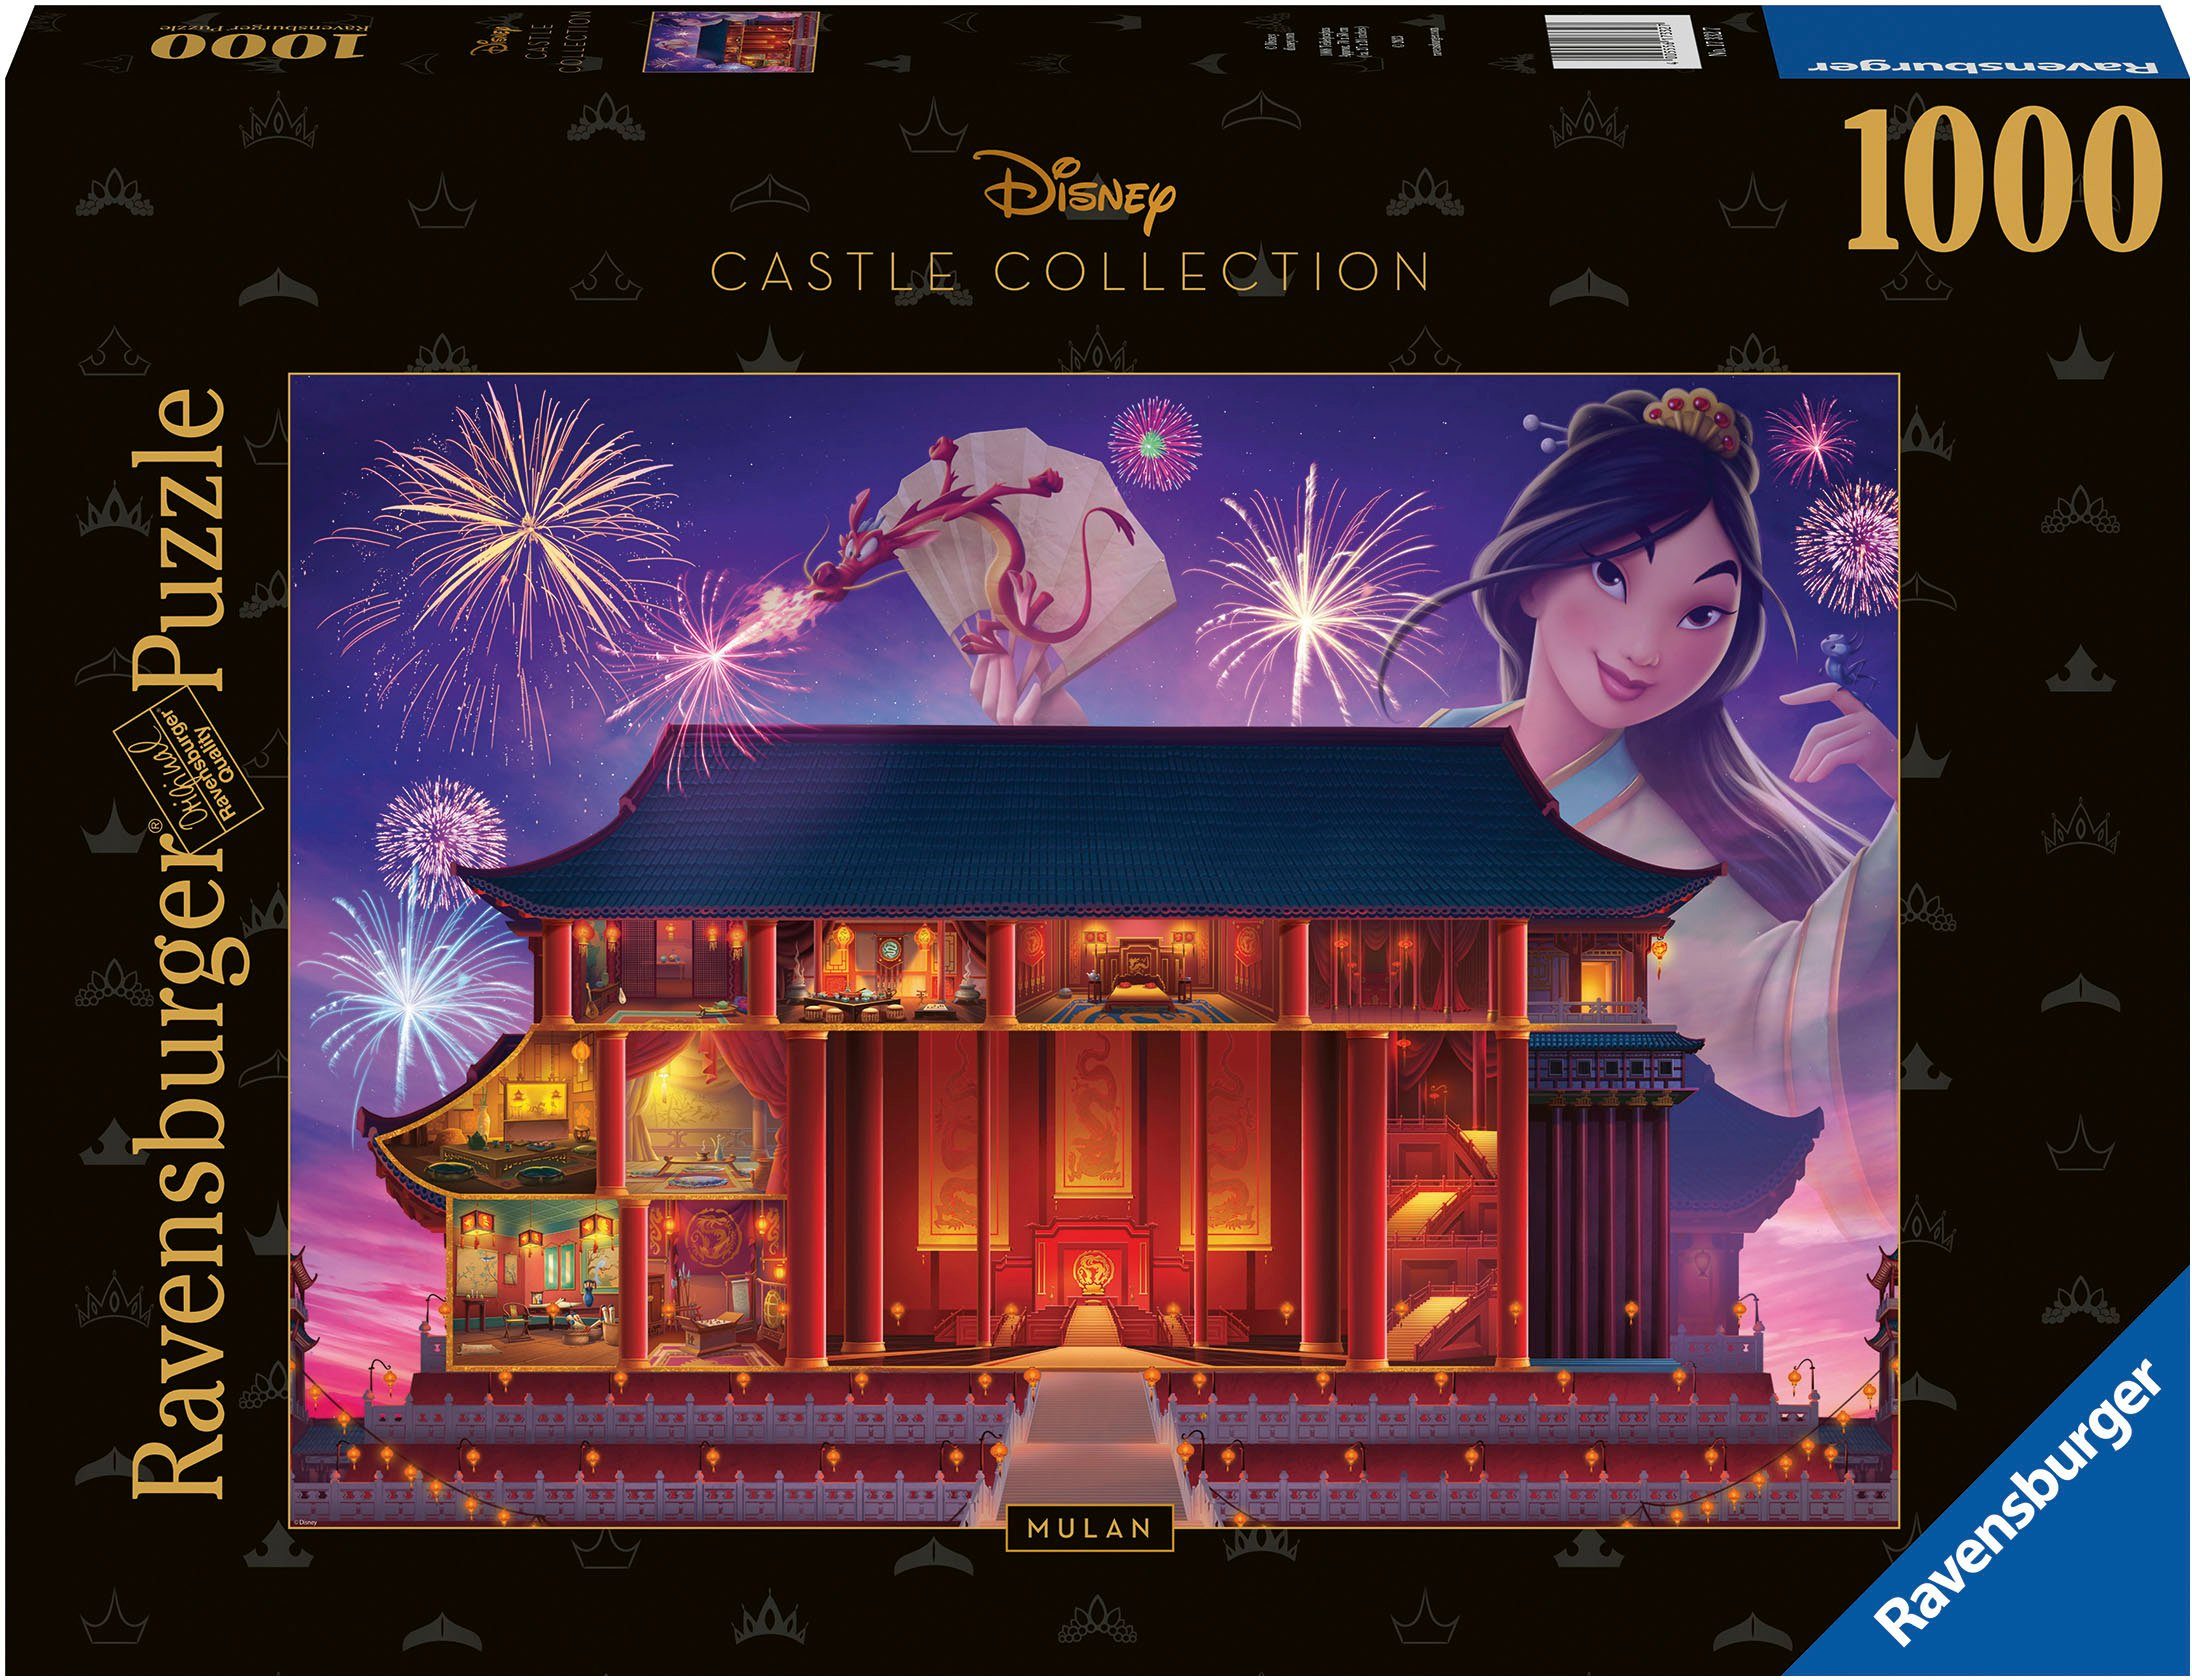 Disney Germany 1000 Puzzleteile, Mulan, Made Castle Collection, Puzzle Ravensburger in